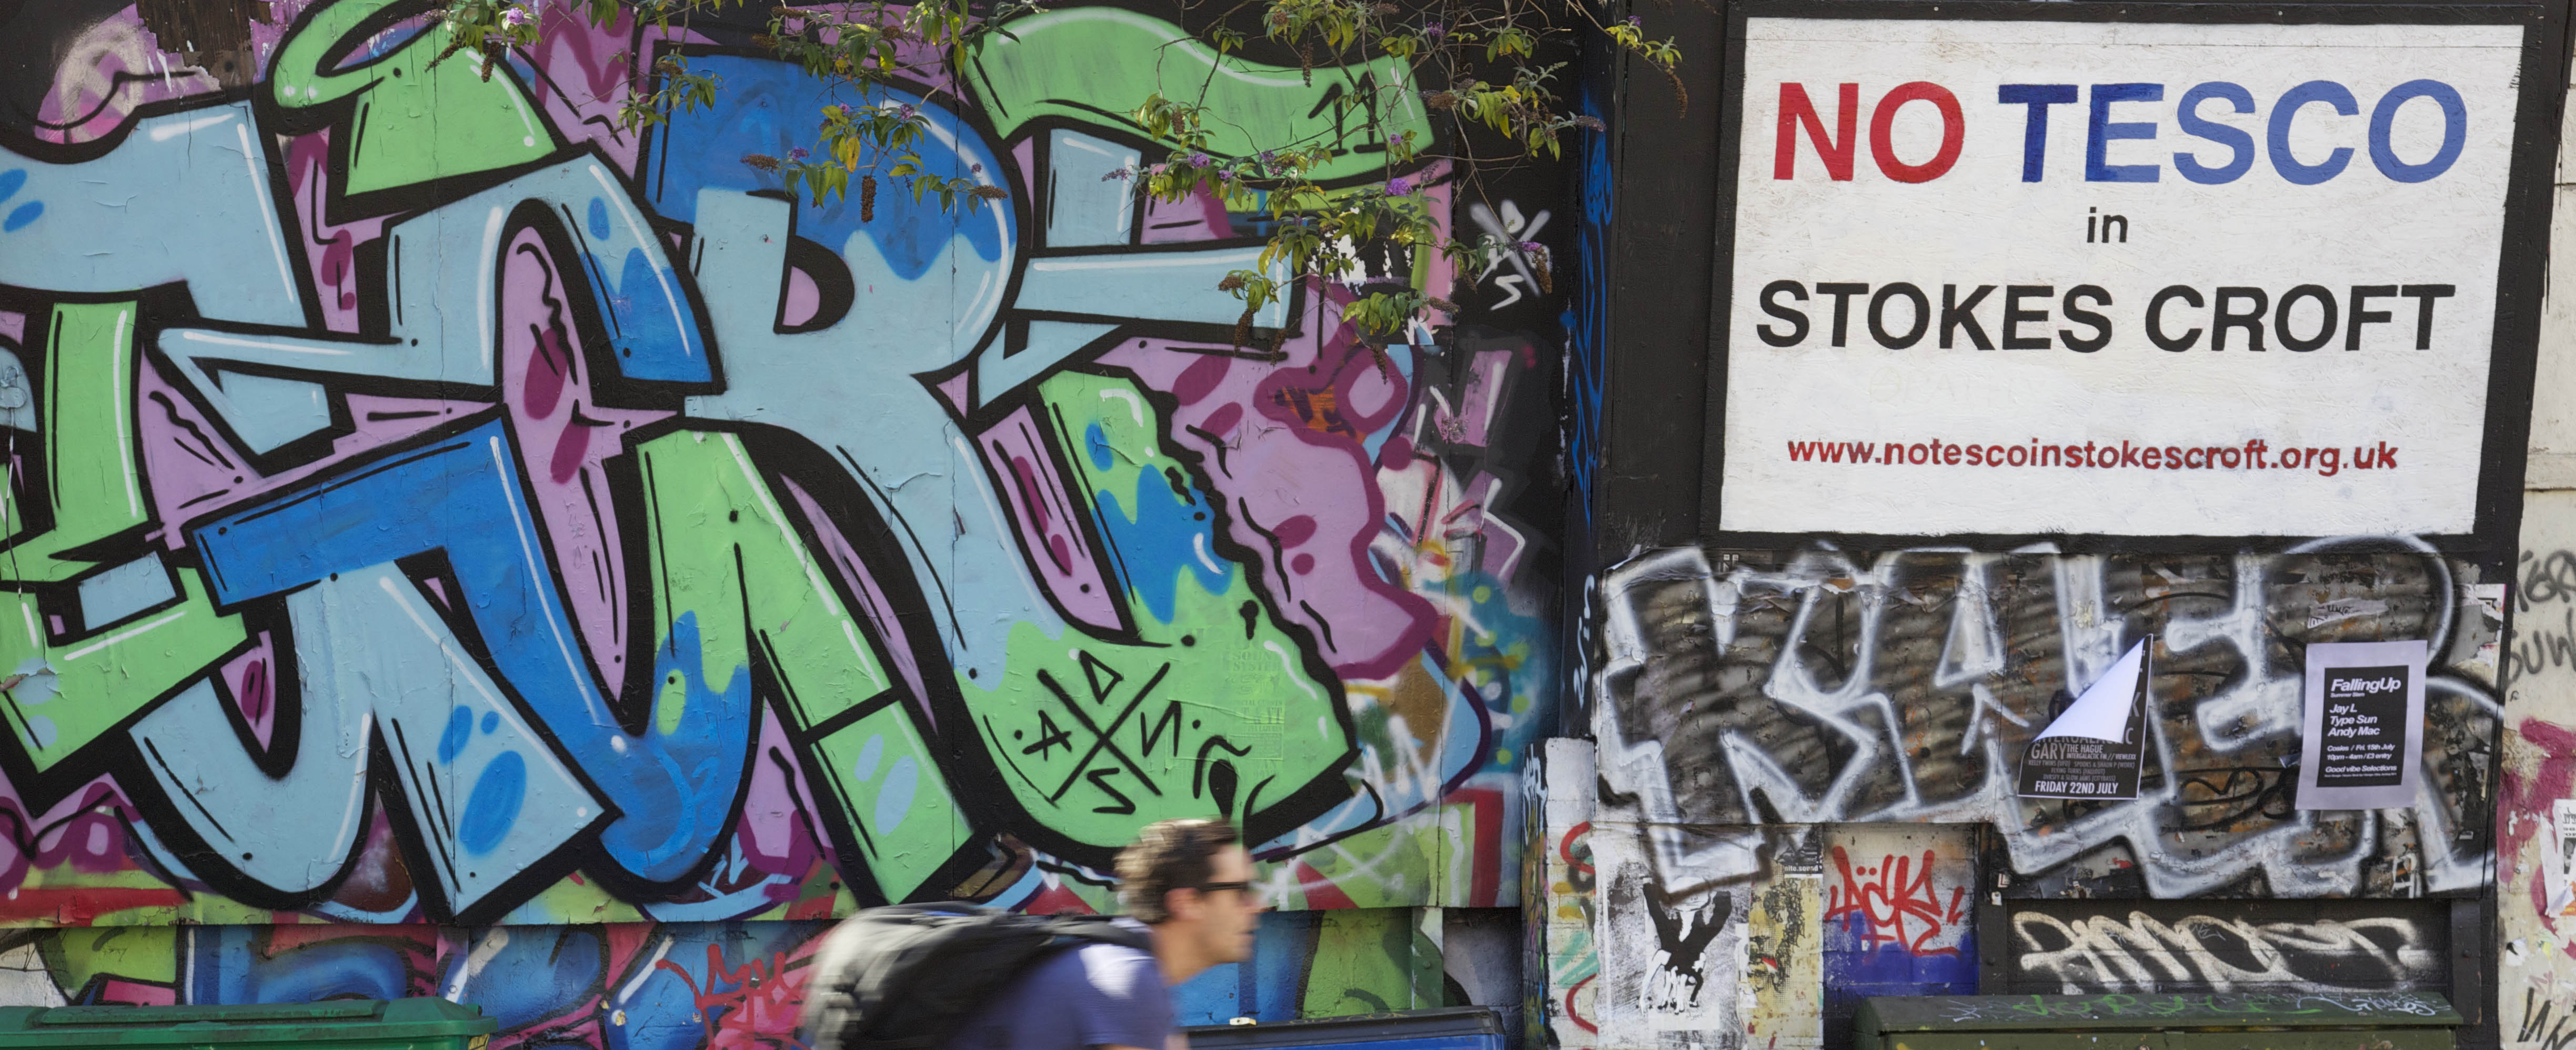 A graffiti'd wall in Stokes Croft with a sign that reads 'no tesco in stokes croft'. A man is cycling past.